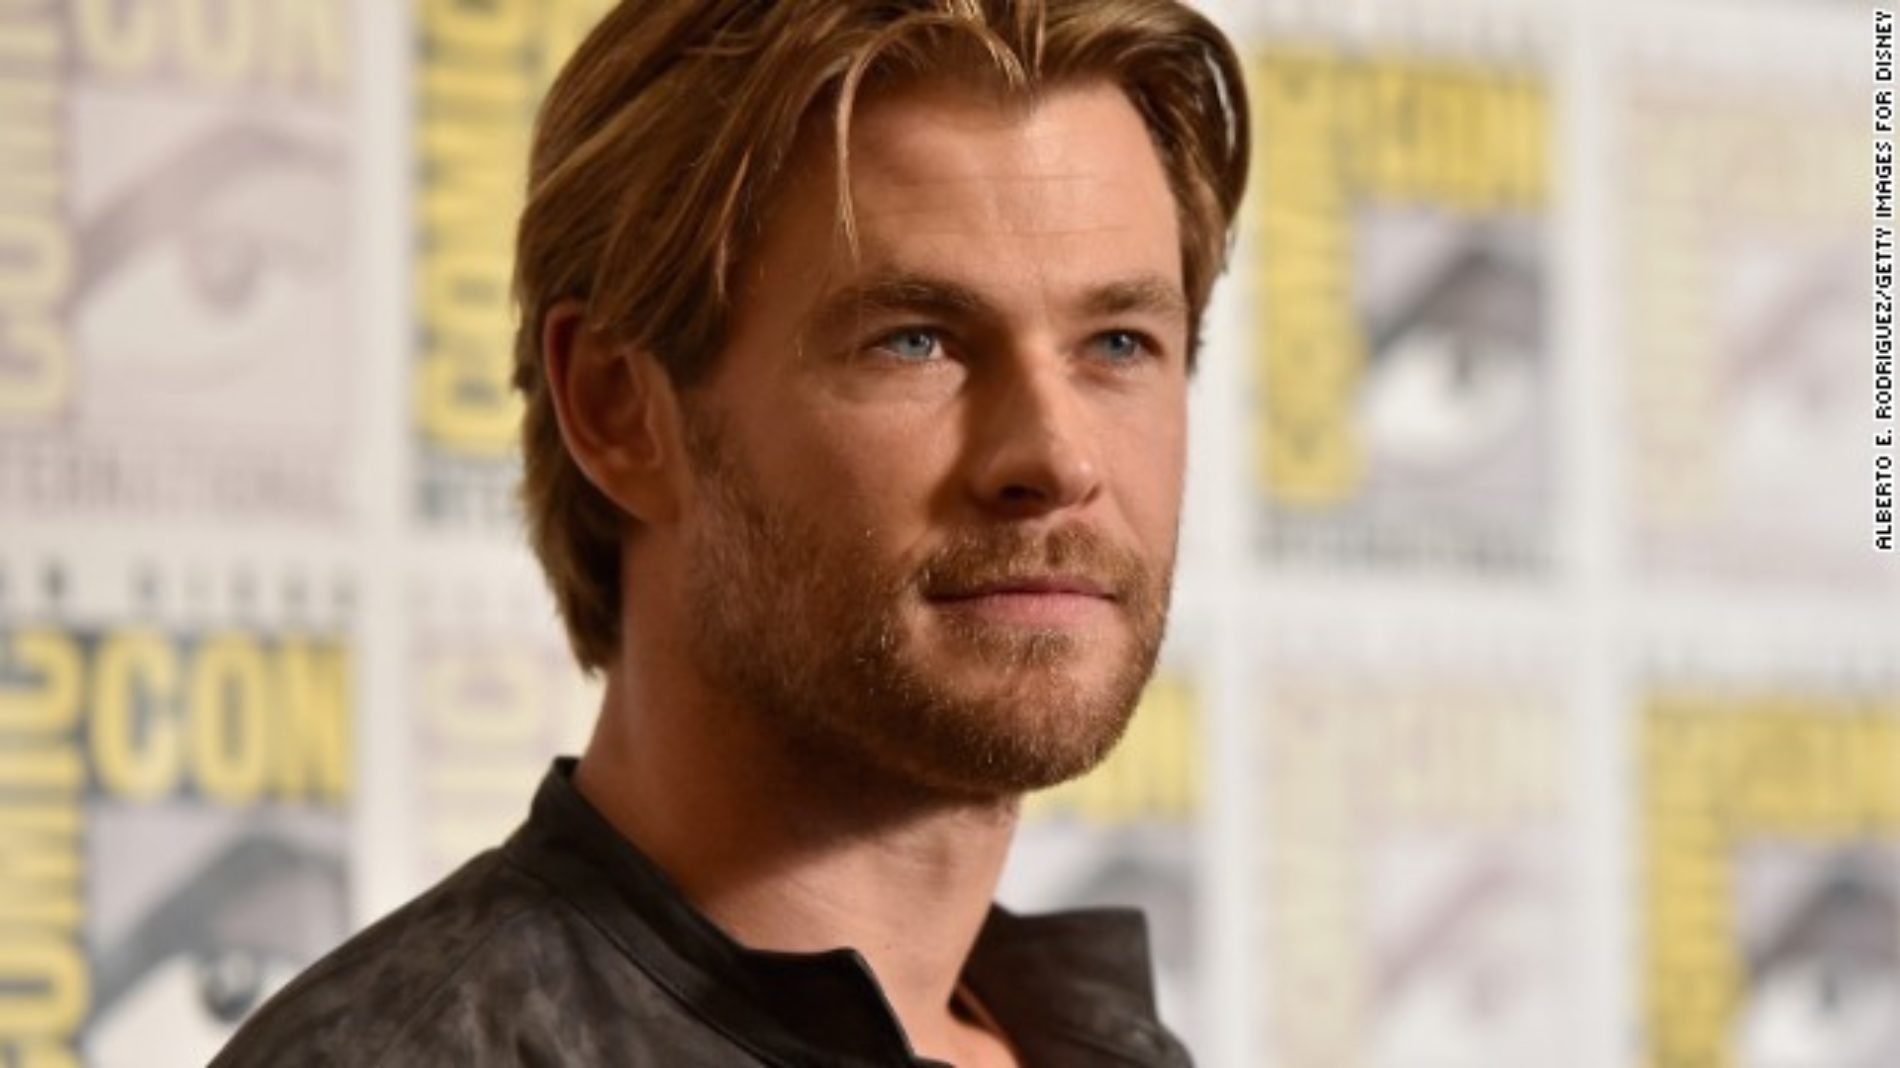 Chris Hemsworth crowned People Magazine’s Sexiest Man Alive of 2014